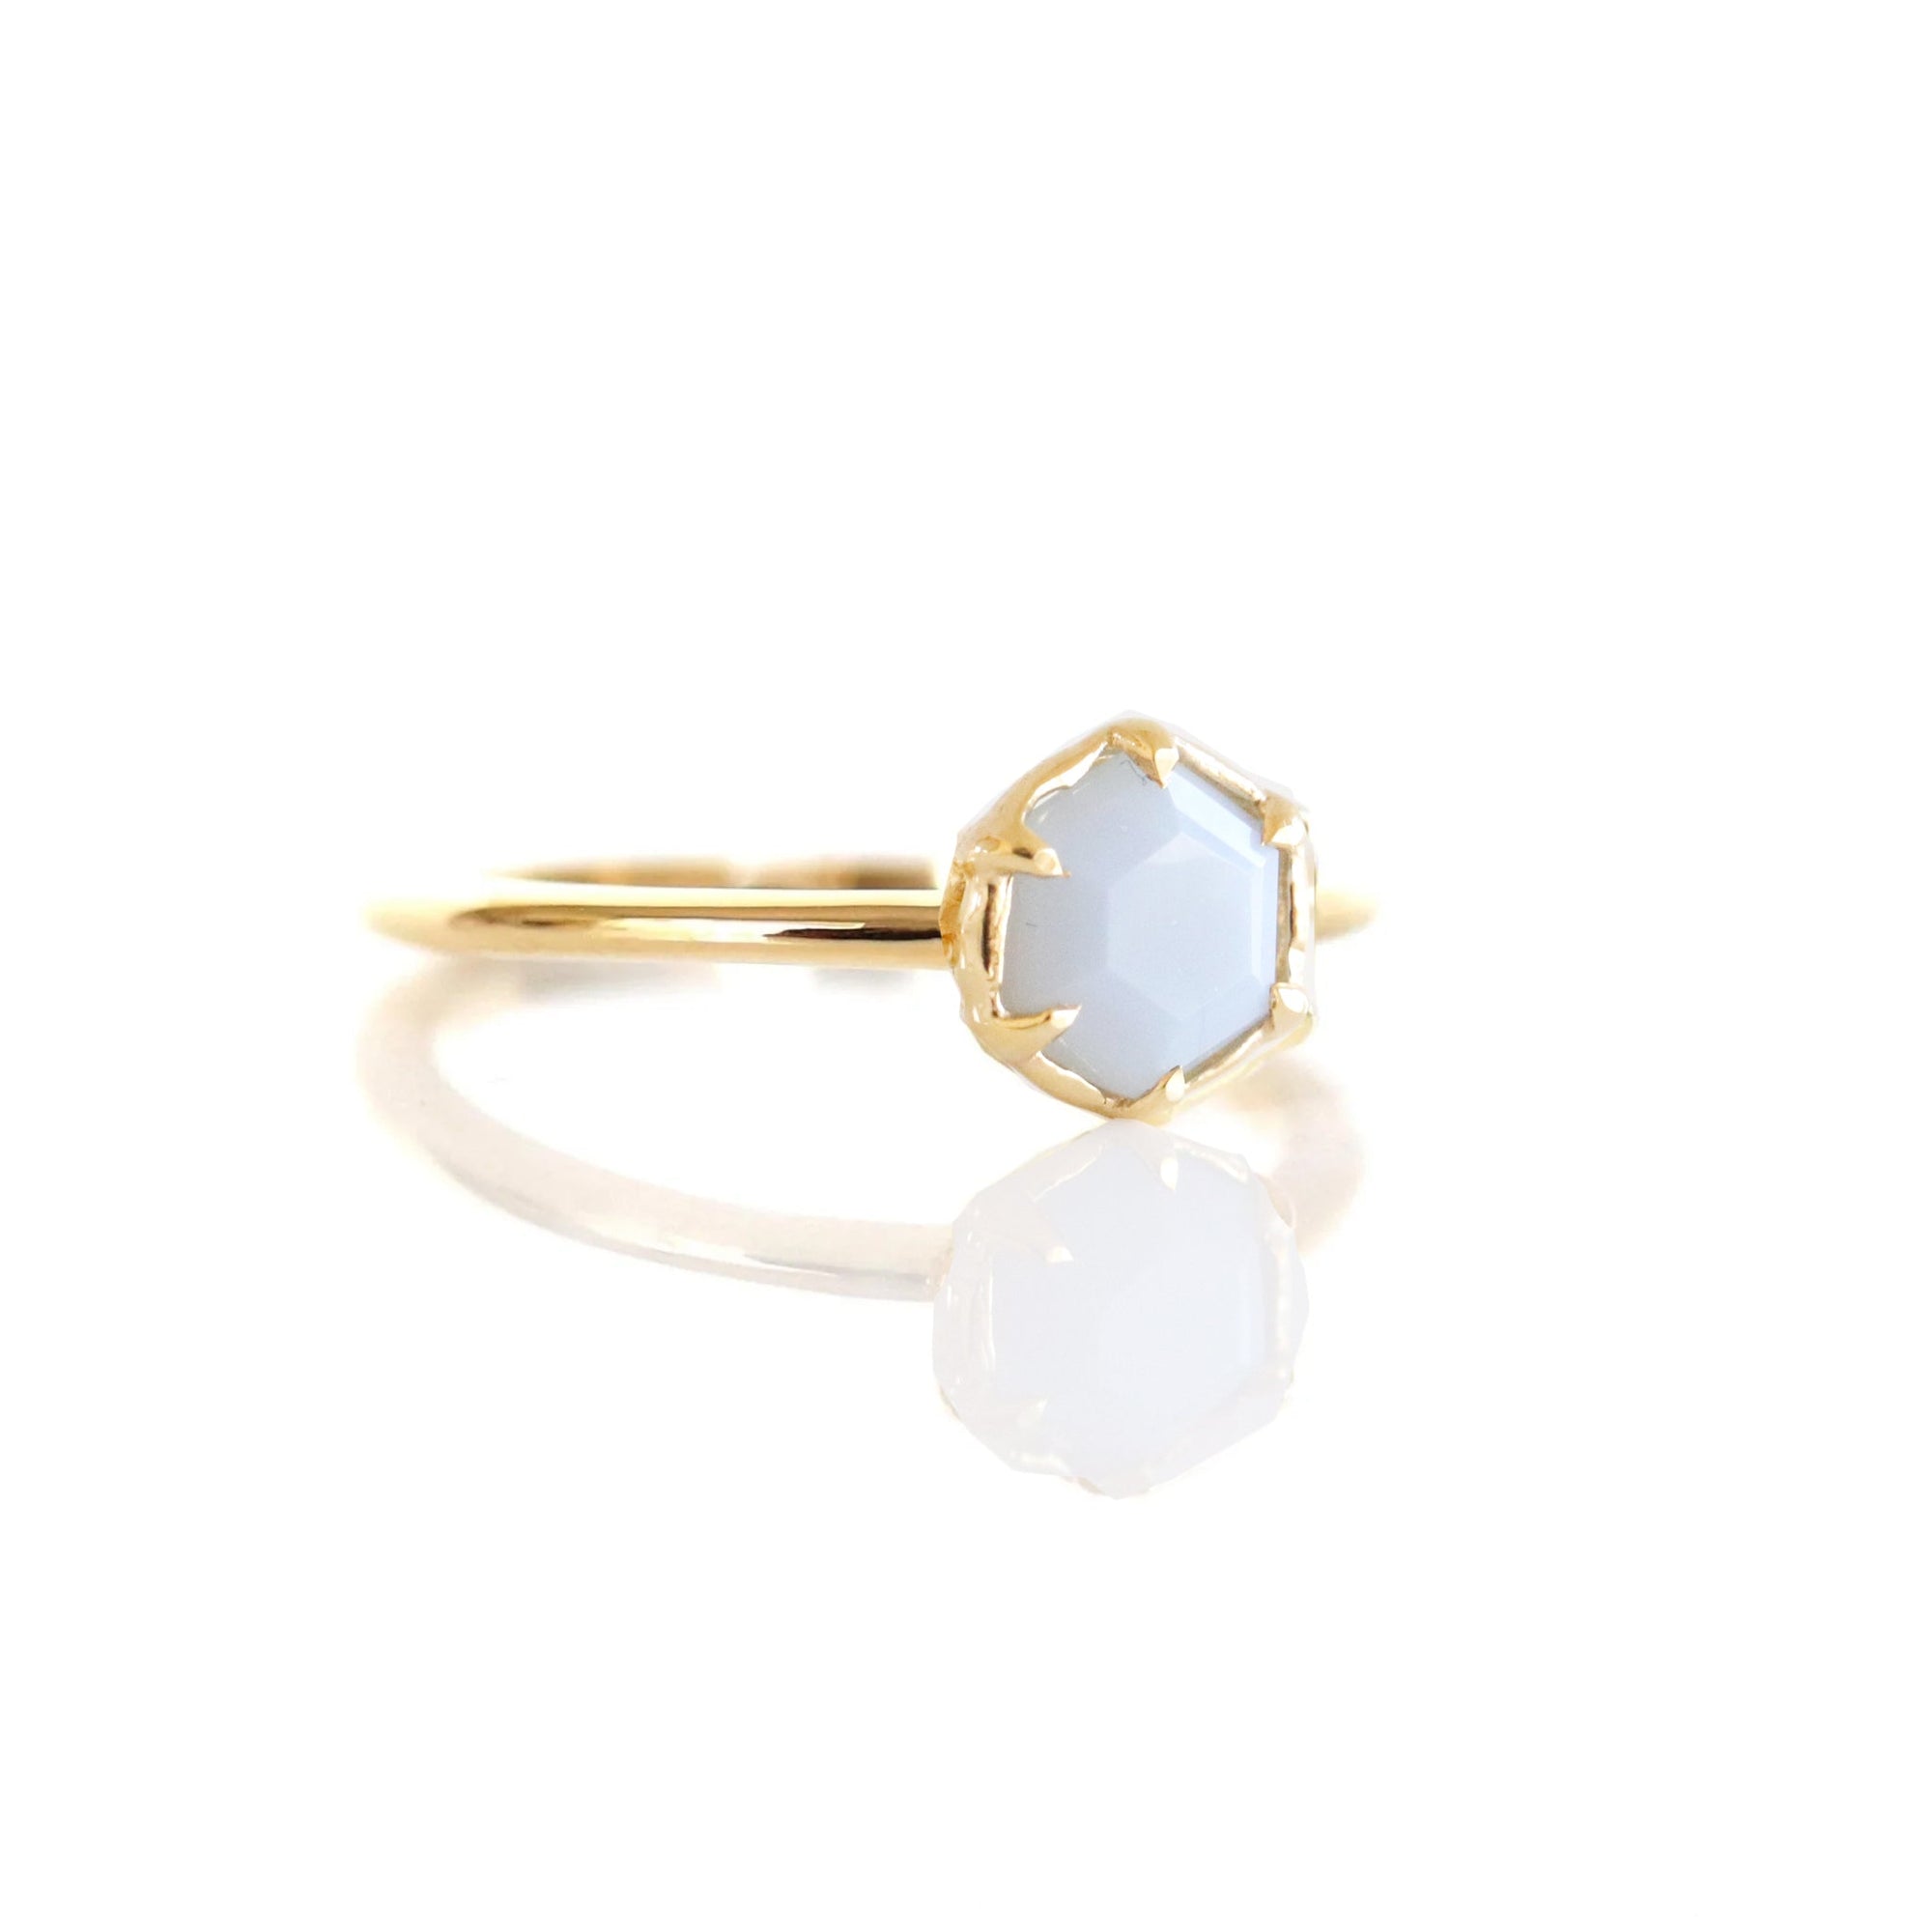 GRACE RING - ARCTIC BLUE OPAL & GOLD - SO PRETTY CARA COTTER